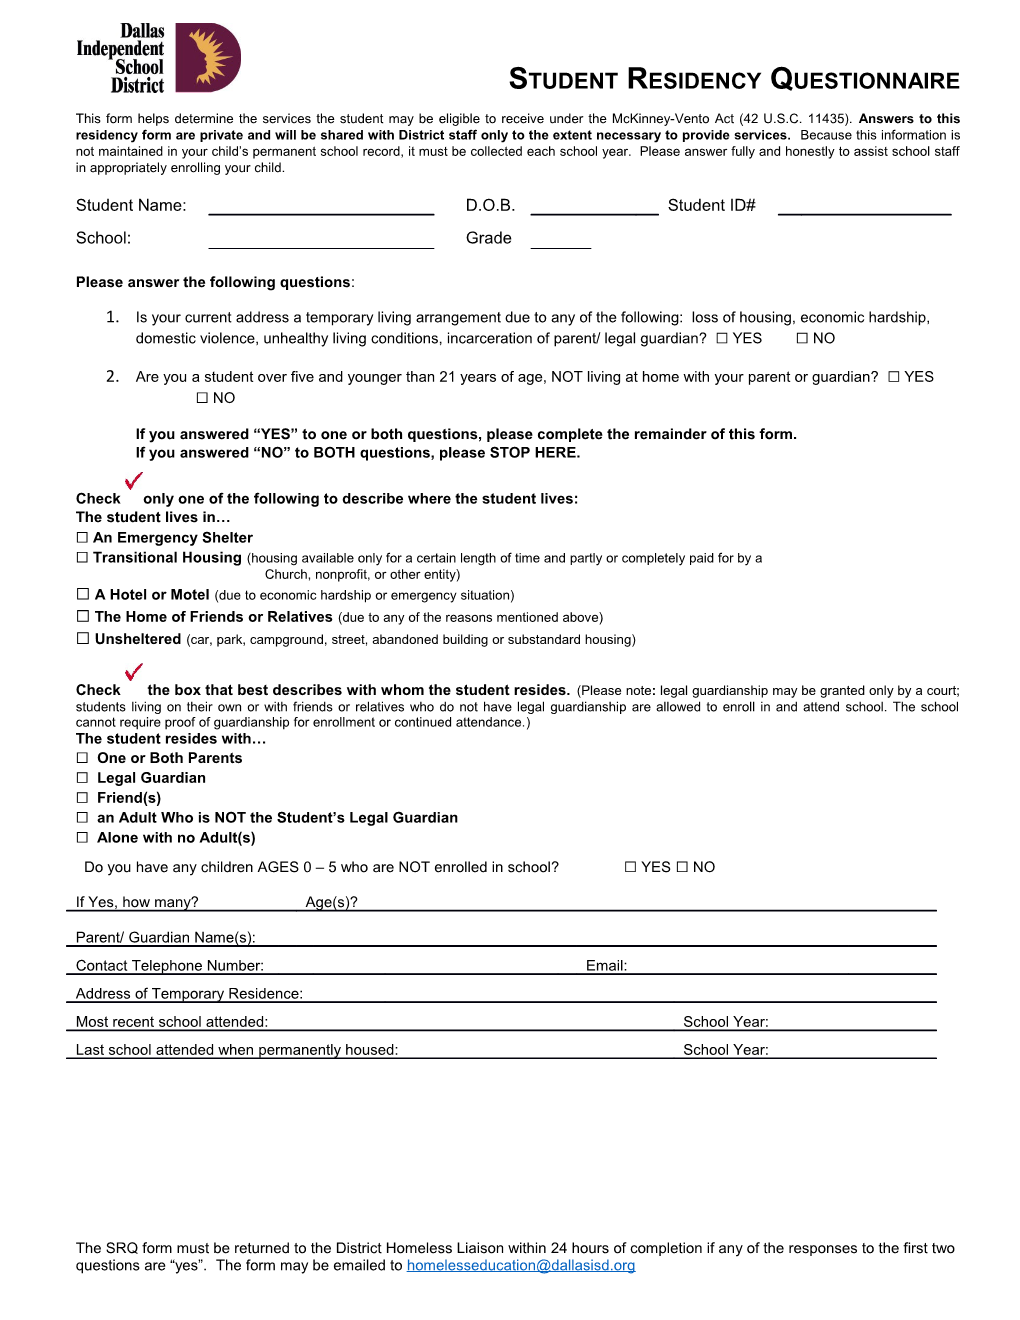 Student Residency Questionnaire